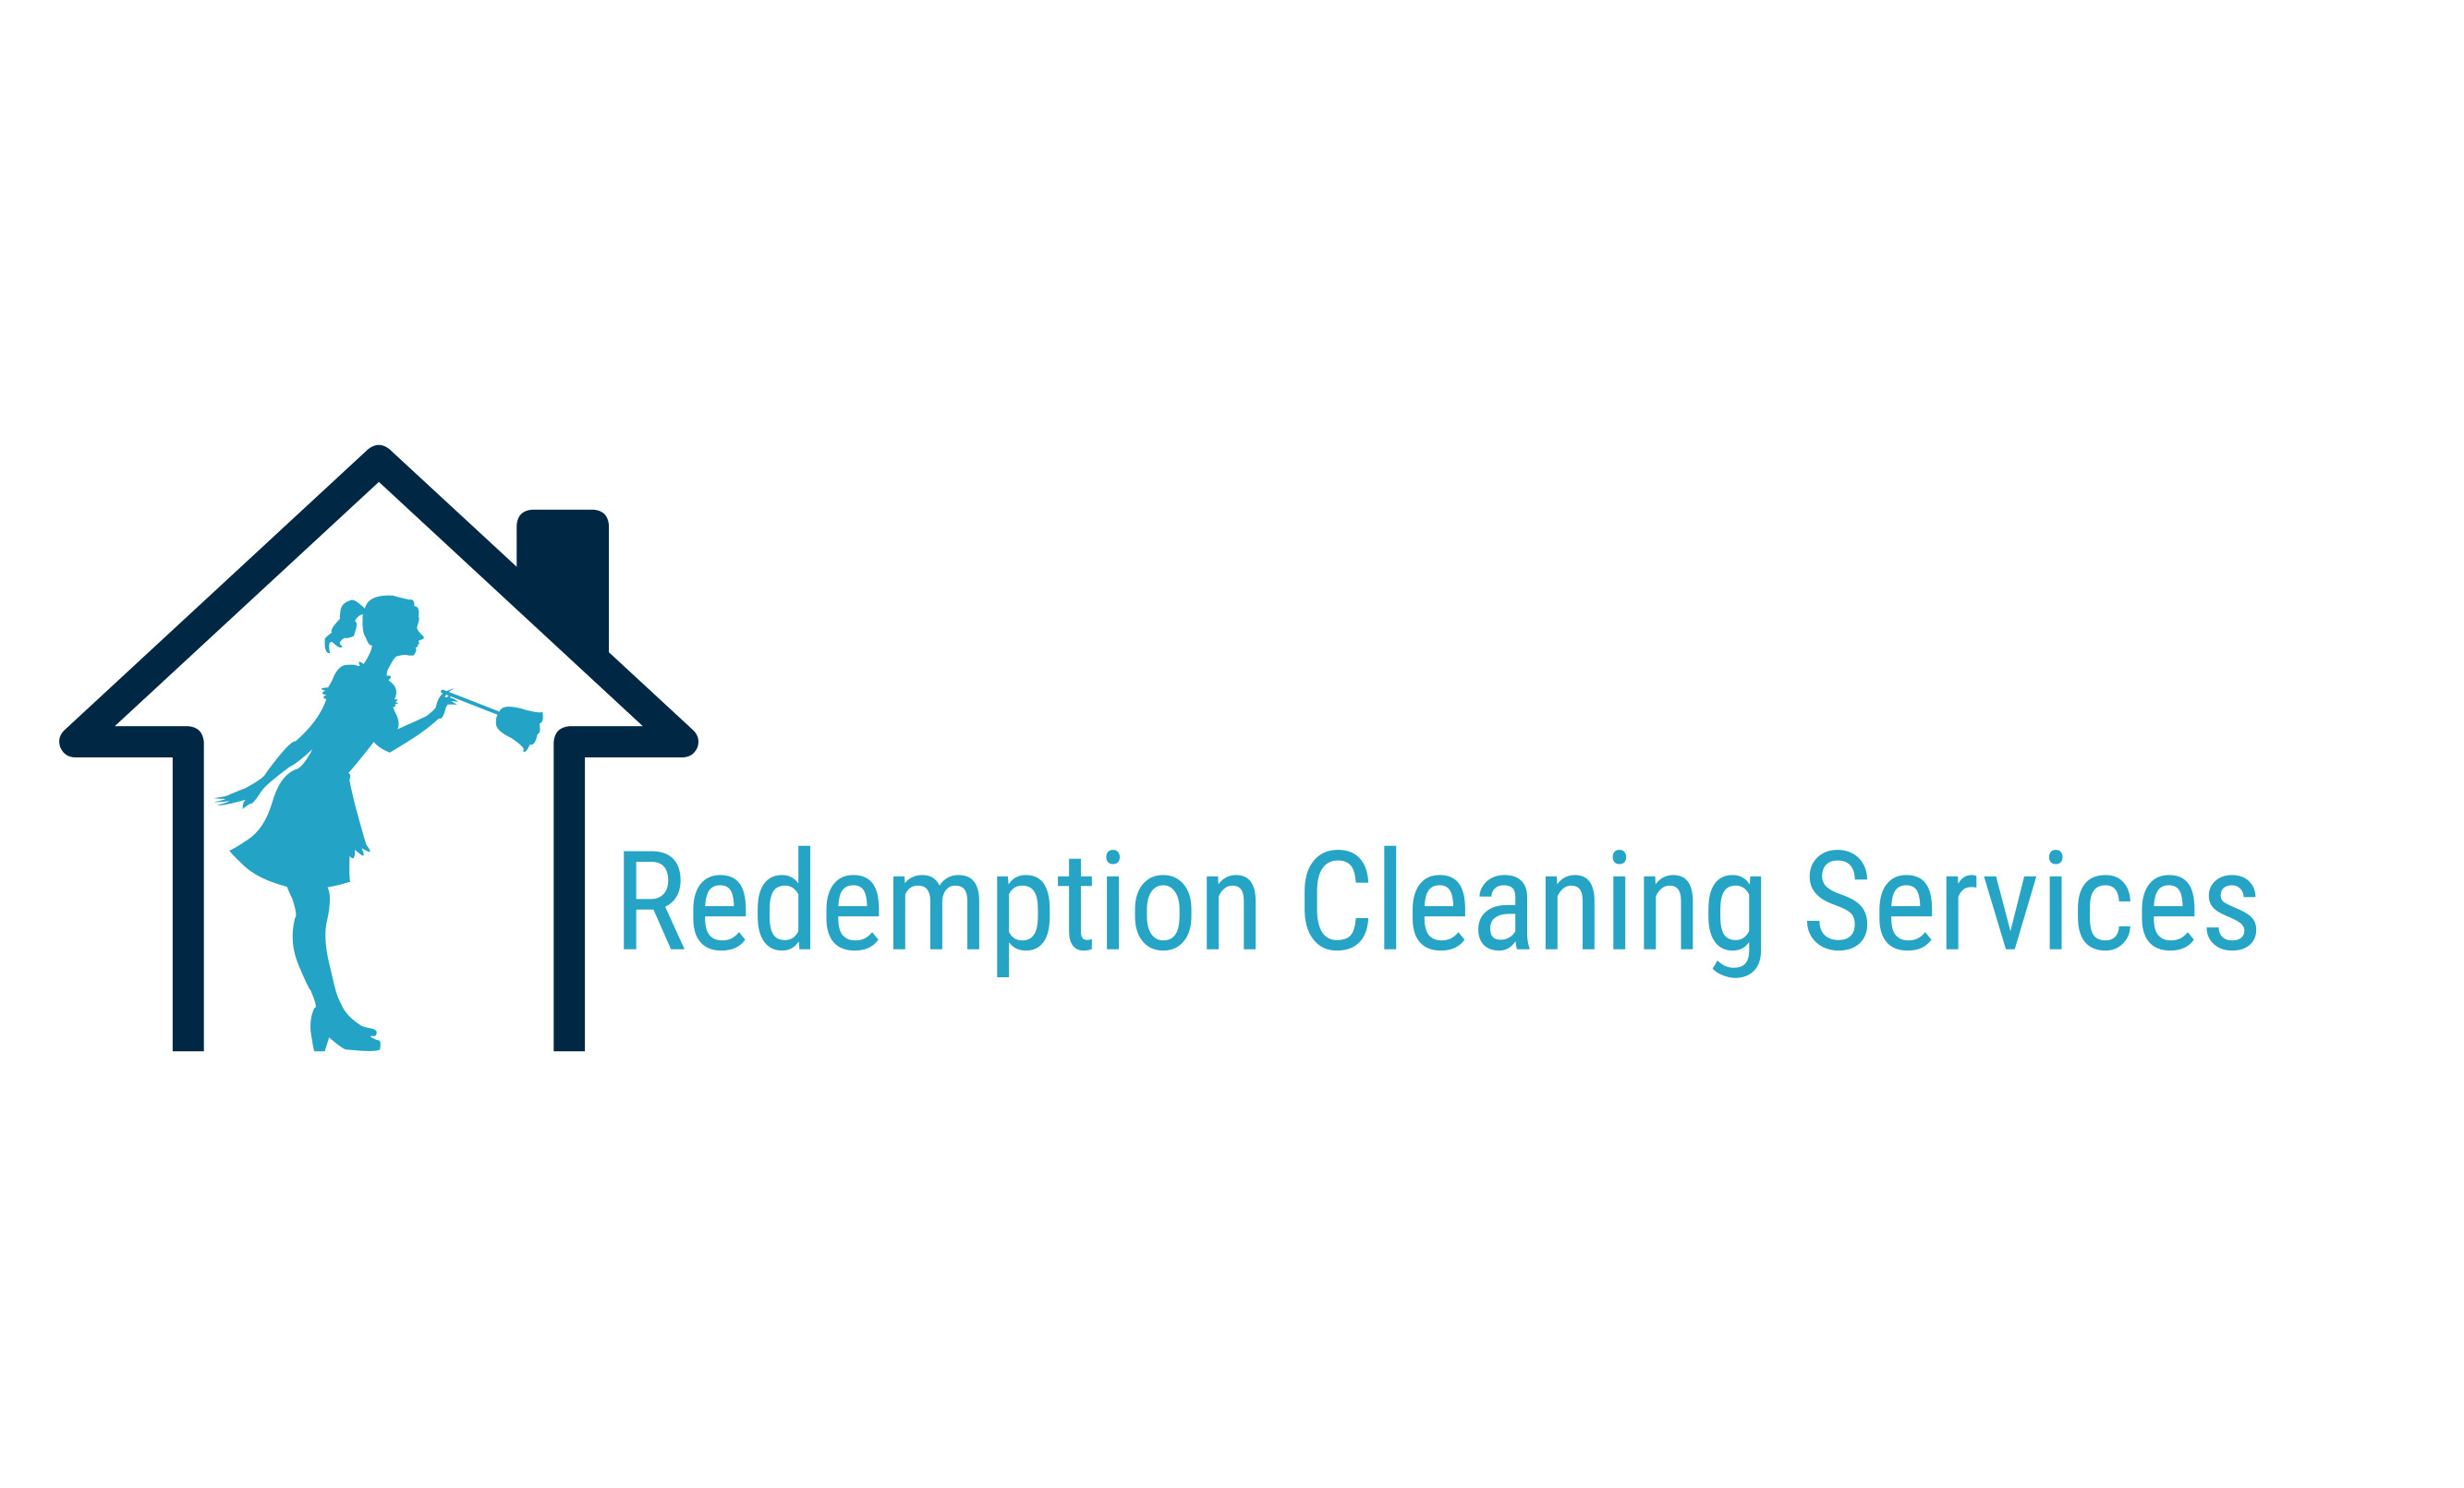 Redemption Cleaning Services Logo